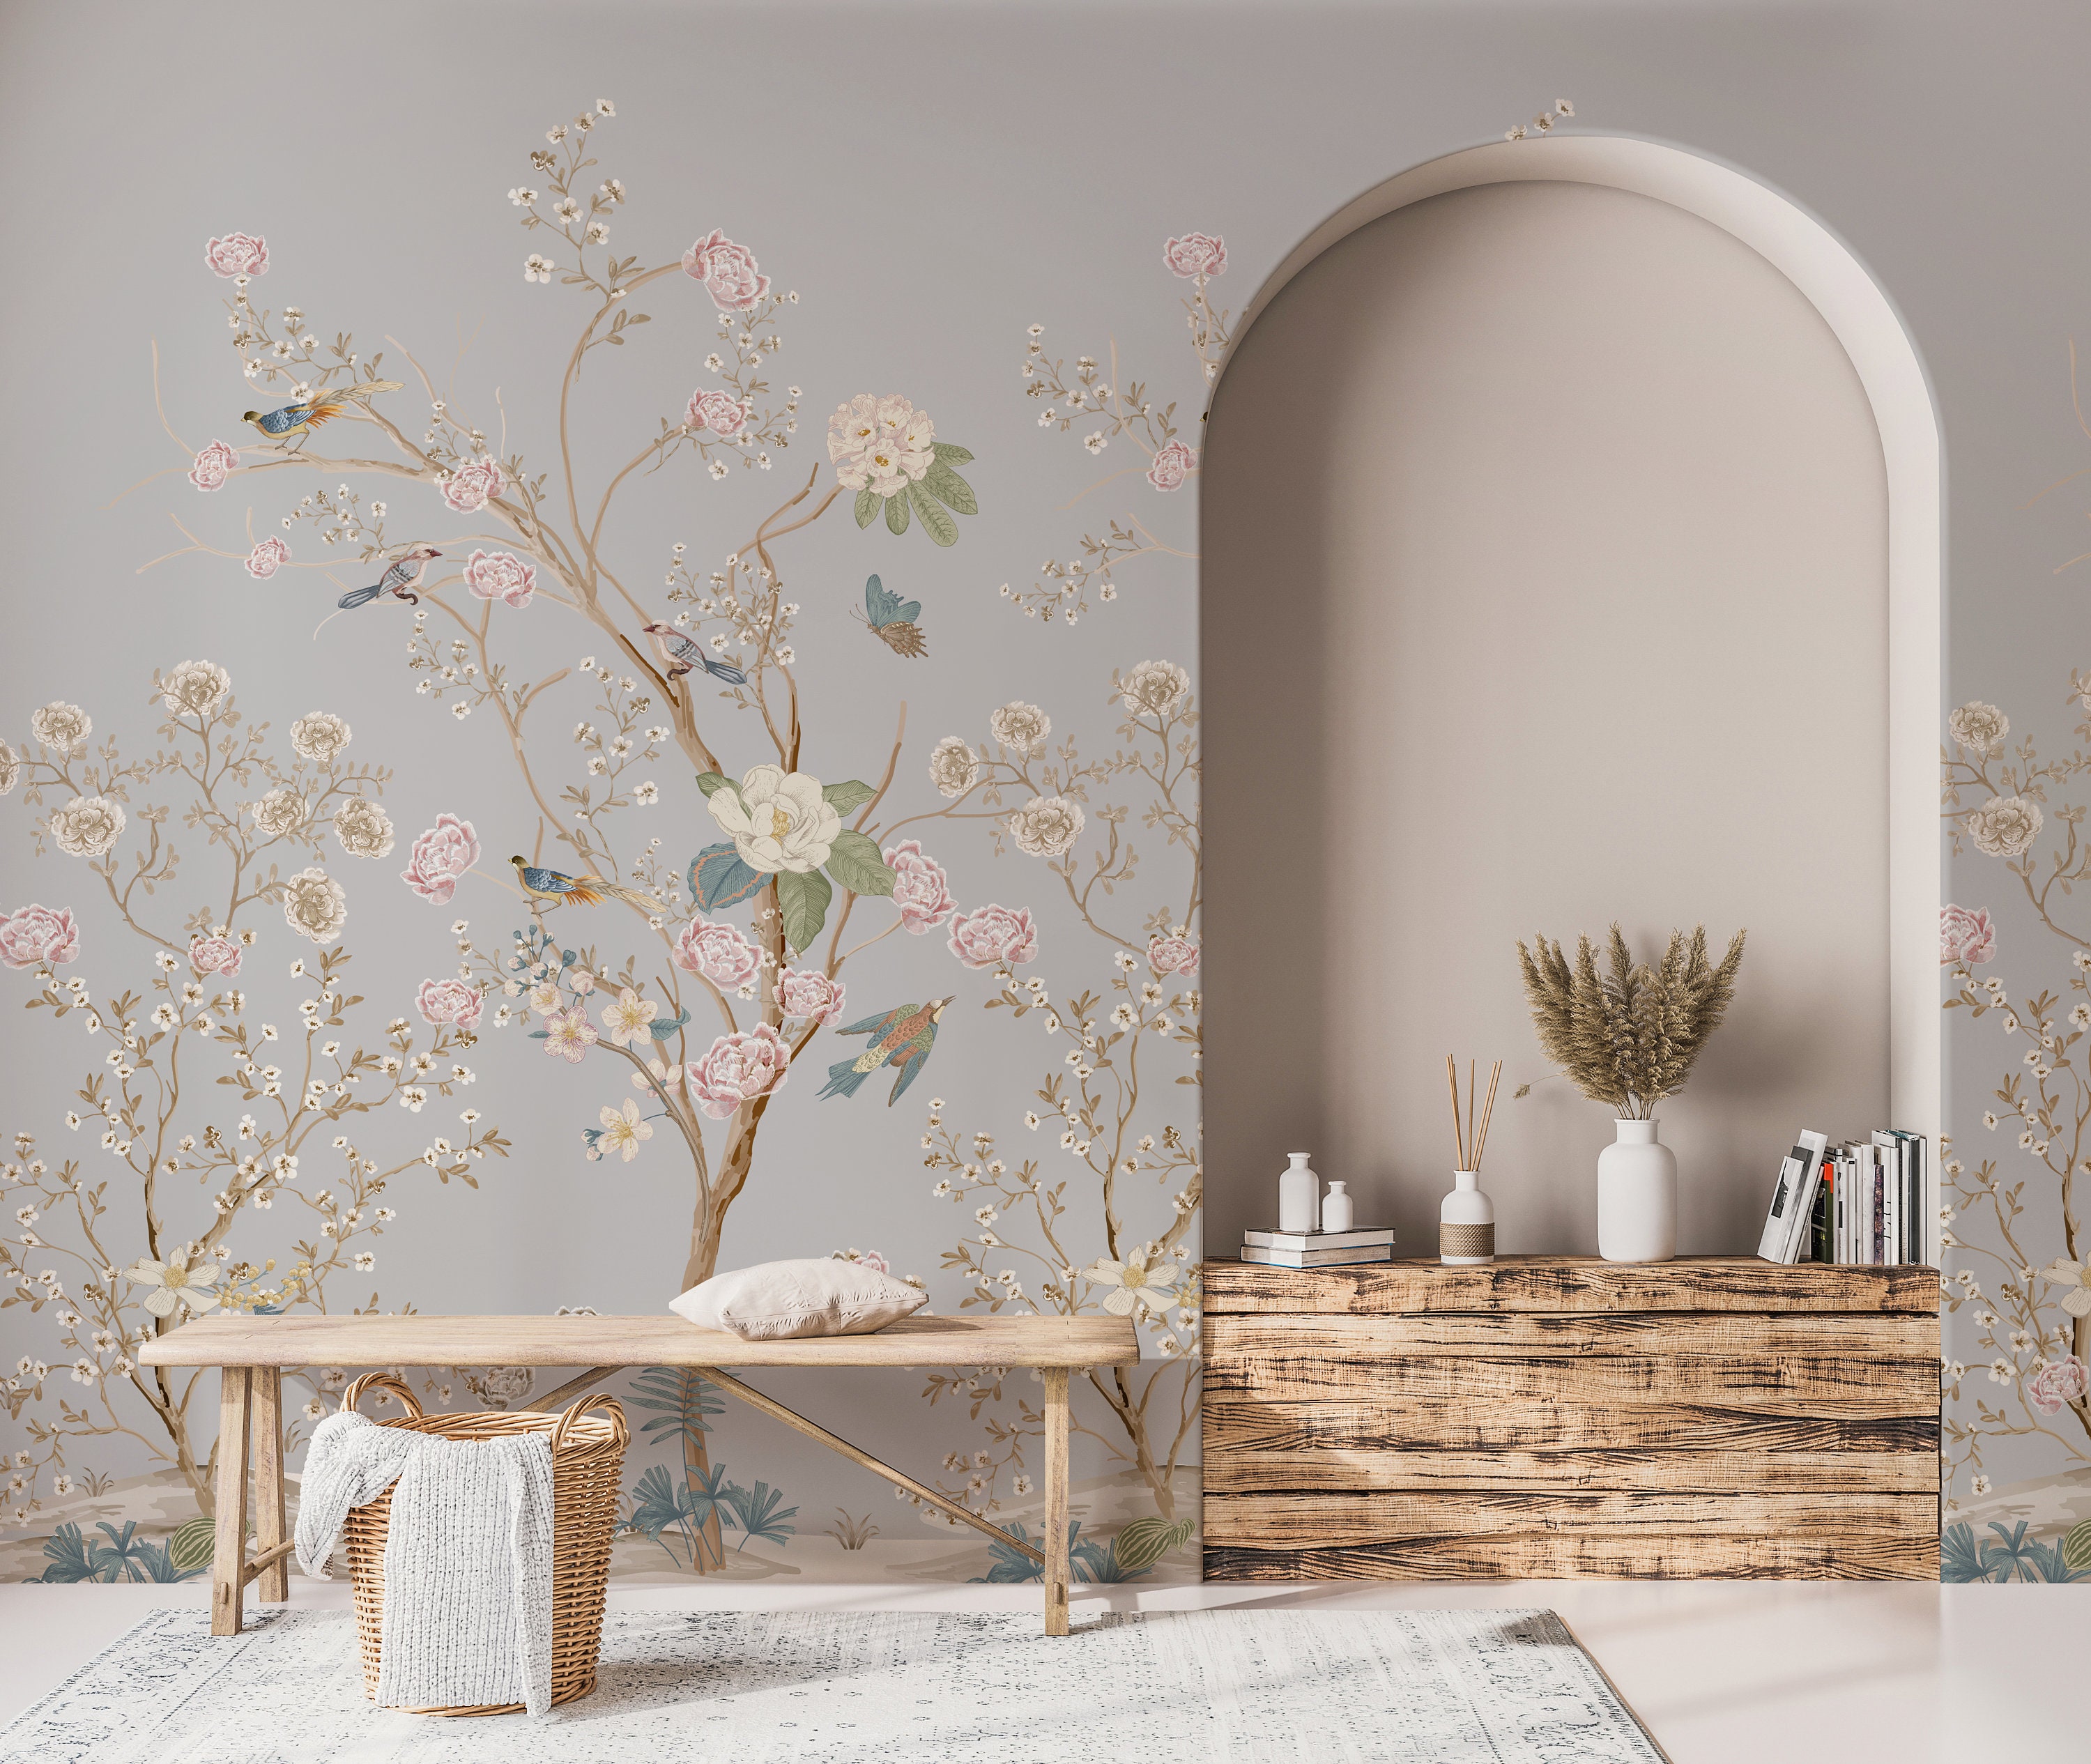 Watercolor Bamboo Wallpaper Tropical Tree With Paradise Birds Wall Mural  Chinese Tree With Colorful Bird Peel and Stick 